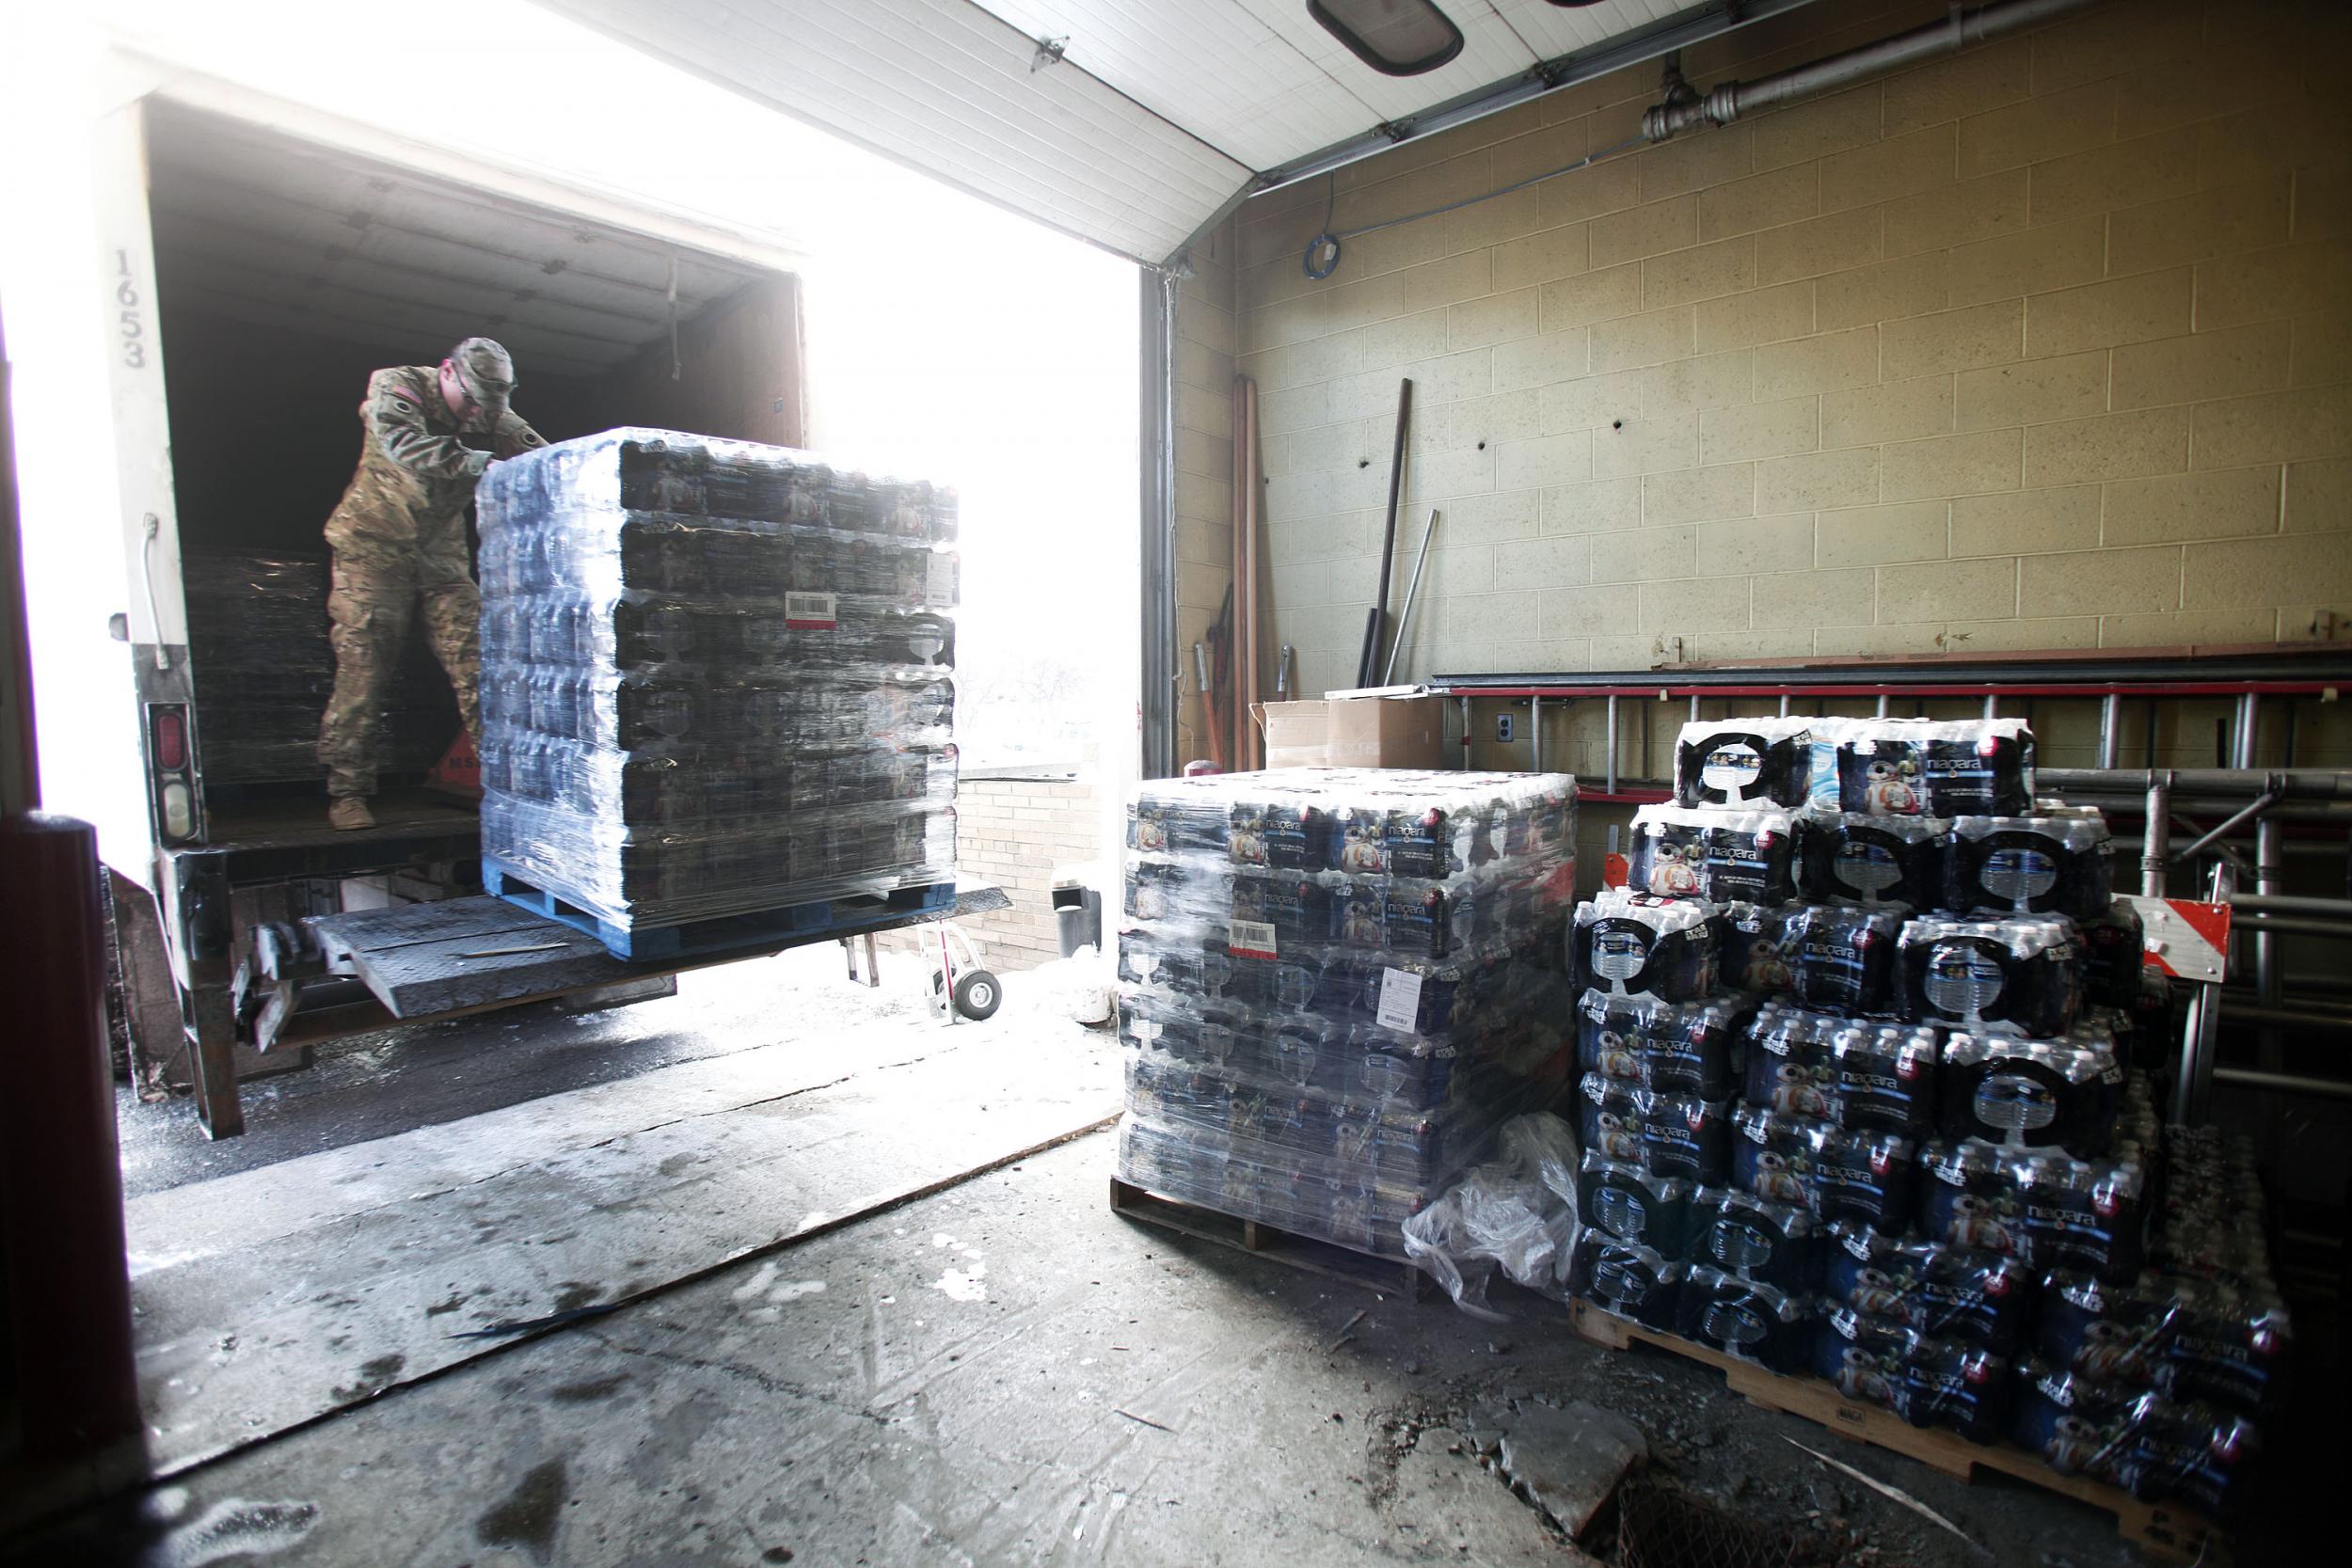 Michigan National Guard Staff Sergeant William Phillips helps unload pallets of bottled water at a Flint Fire Station